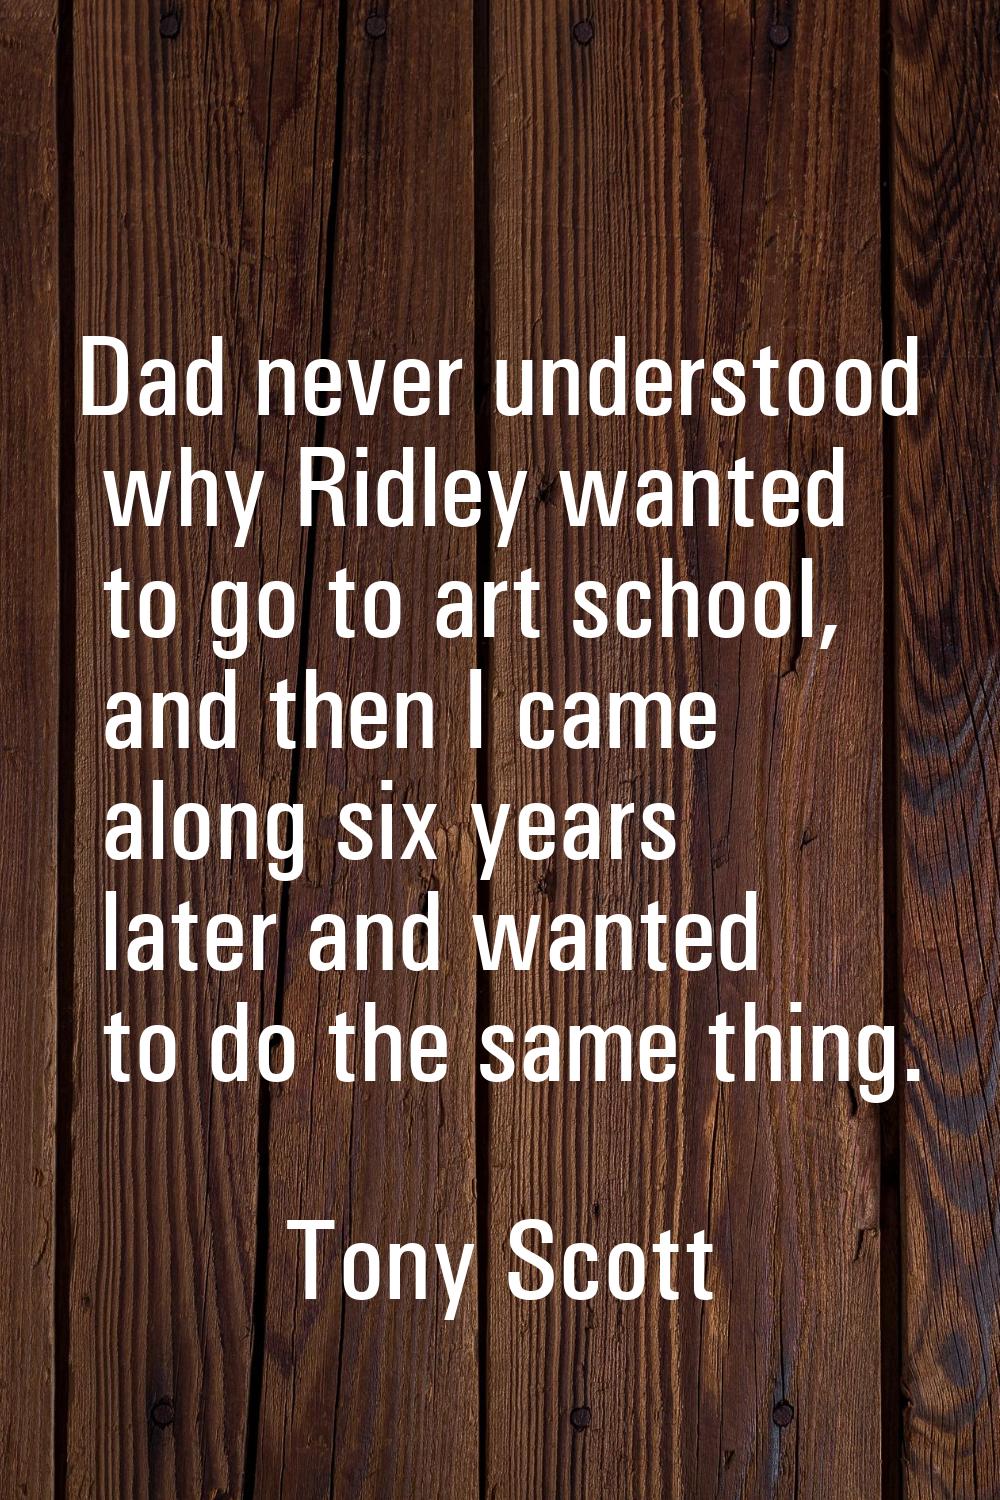 Dad never understood why Ridley wanted to go to art school, and then I came along six years later a